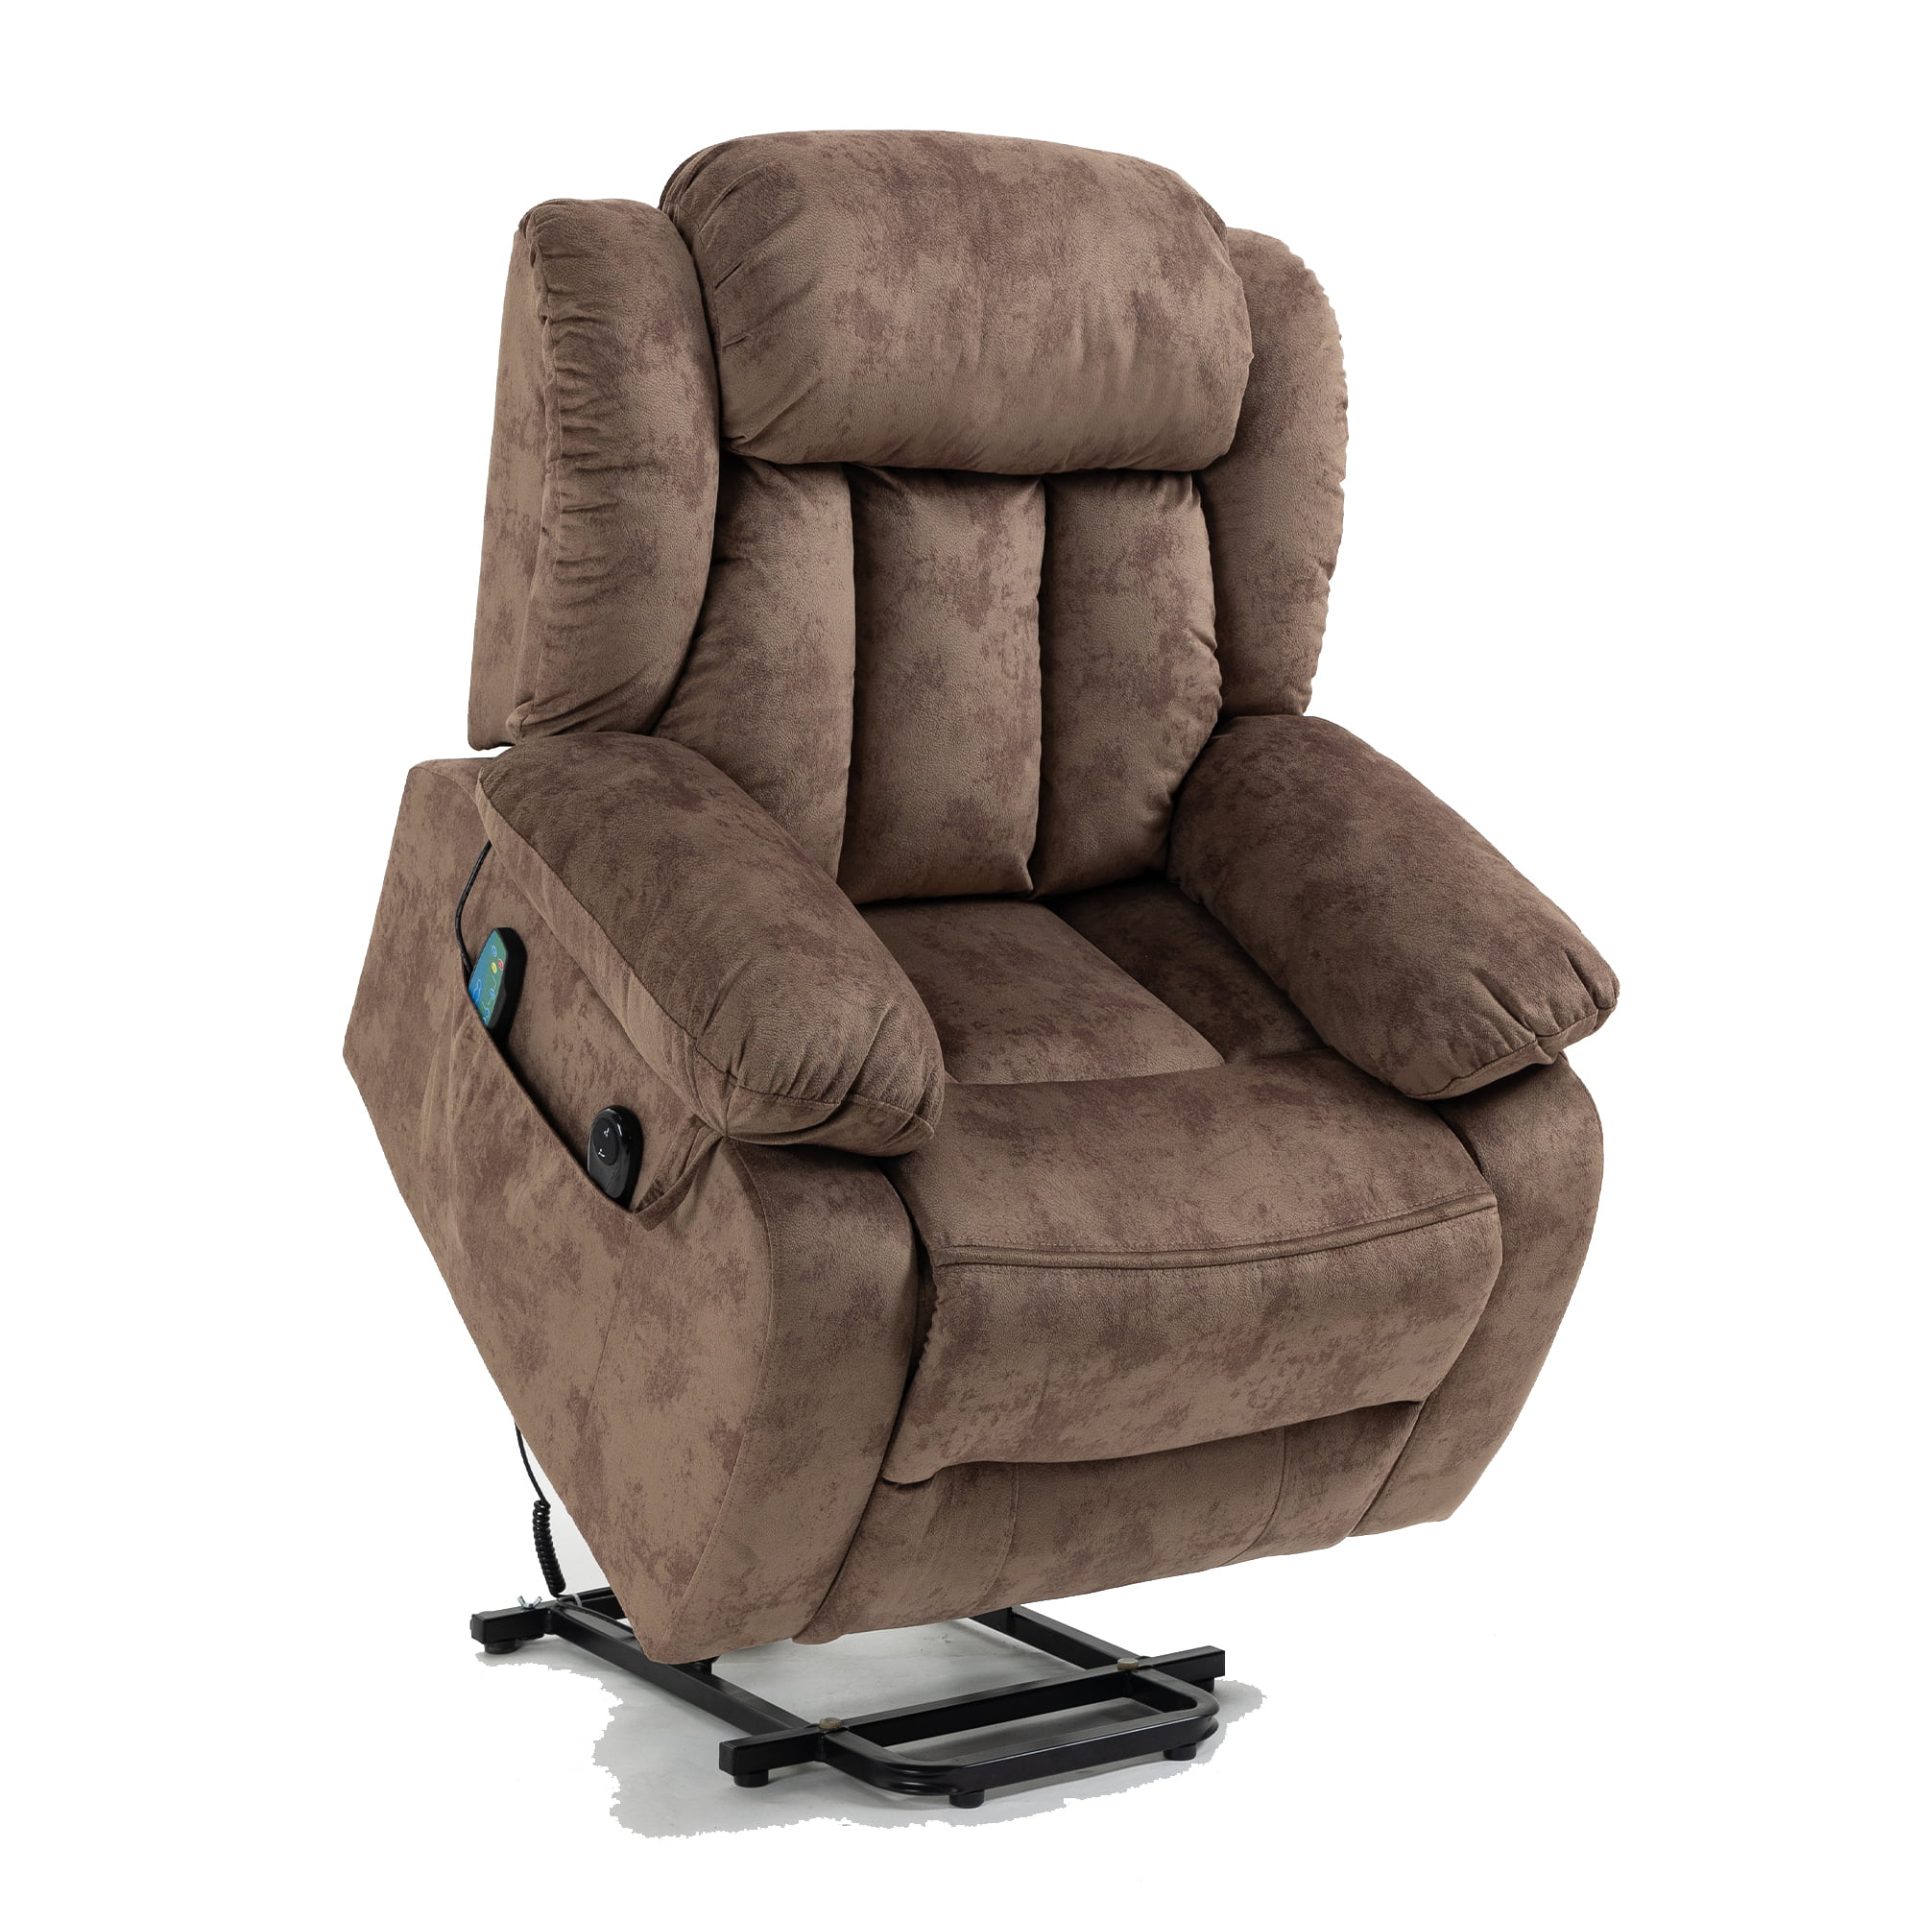 Power recliners have controlled motions